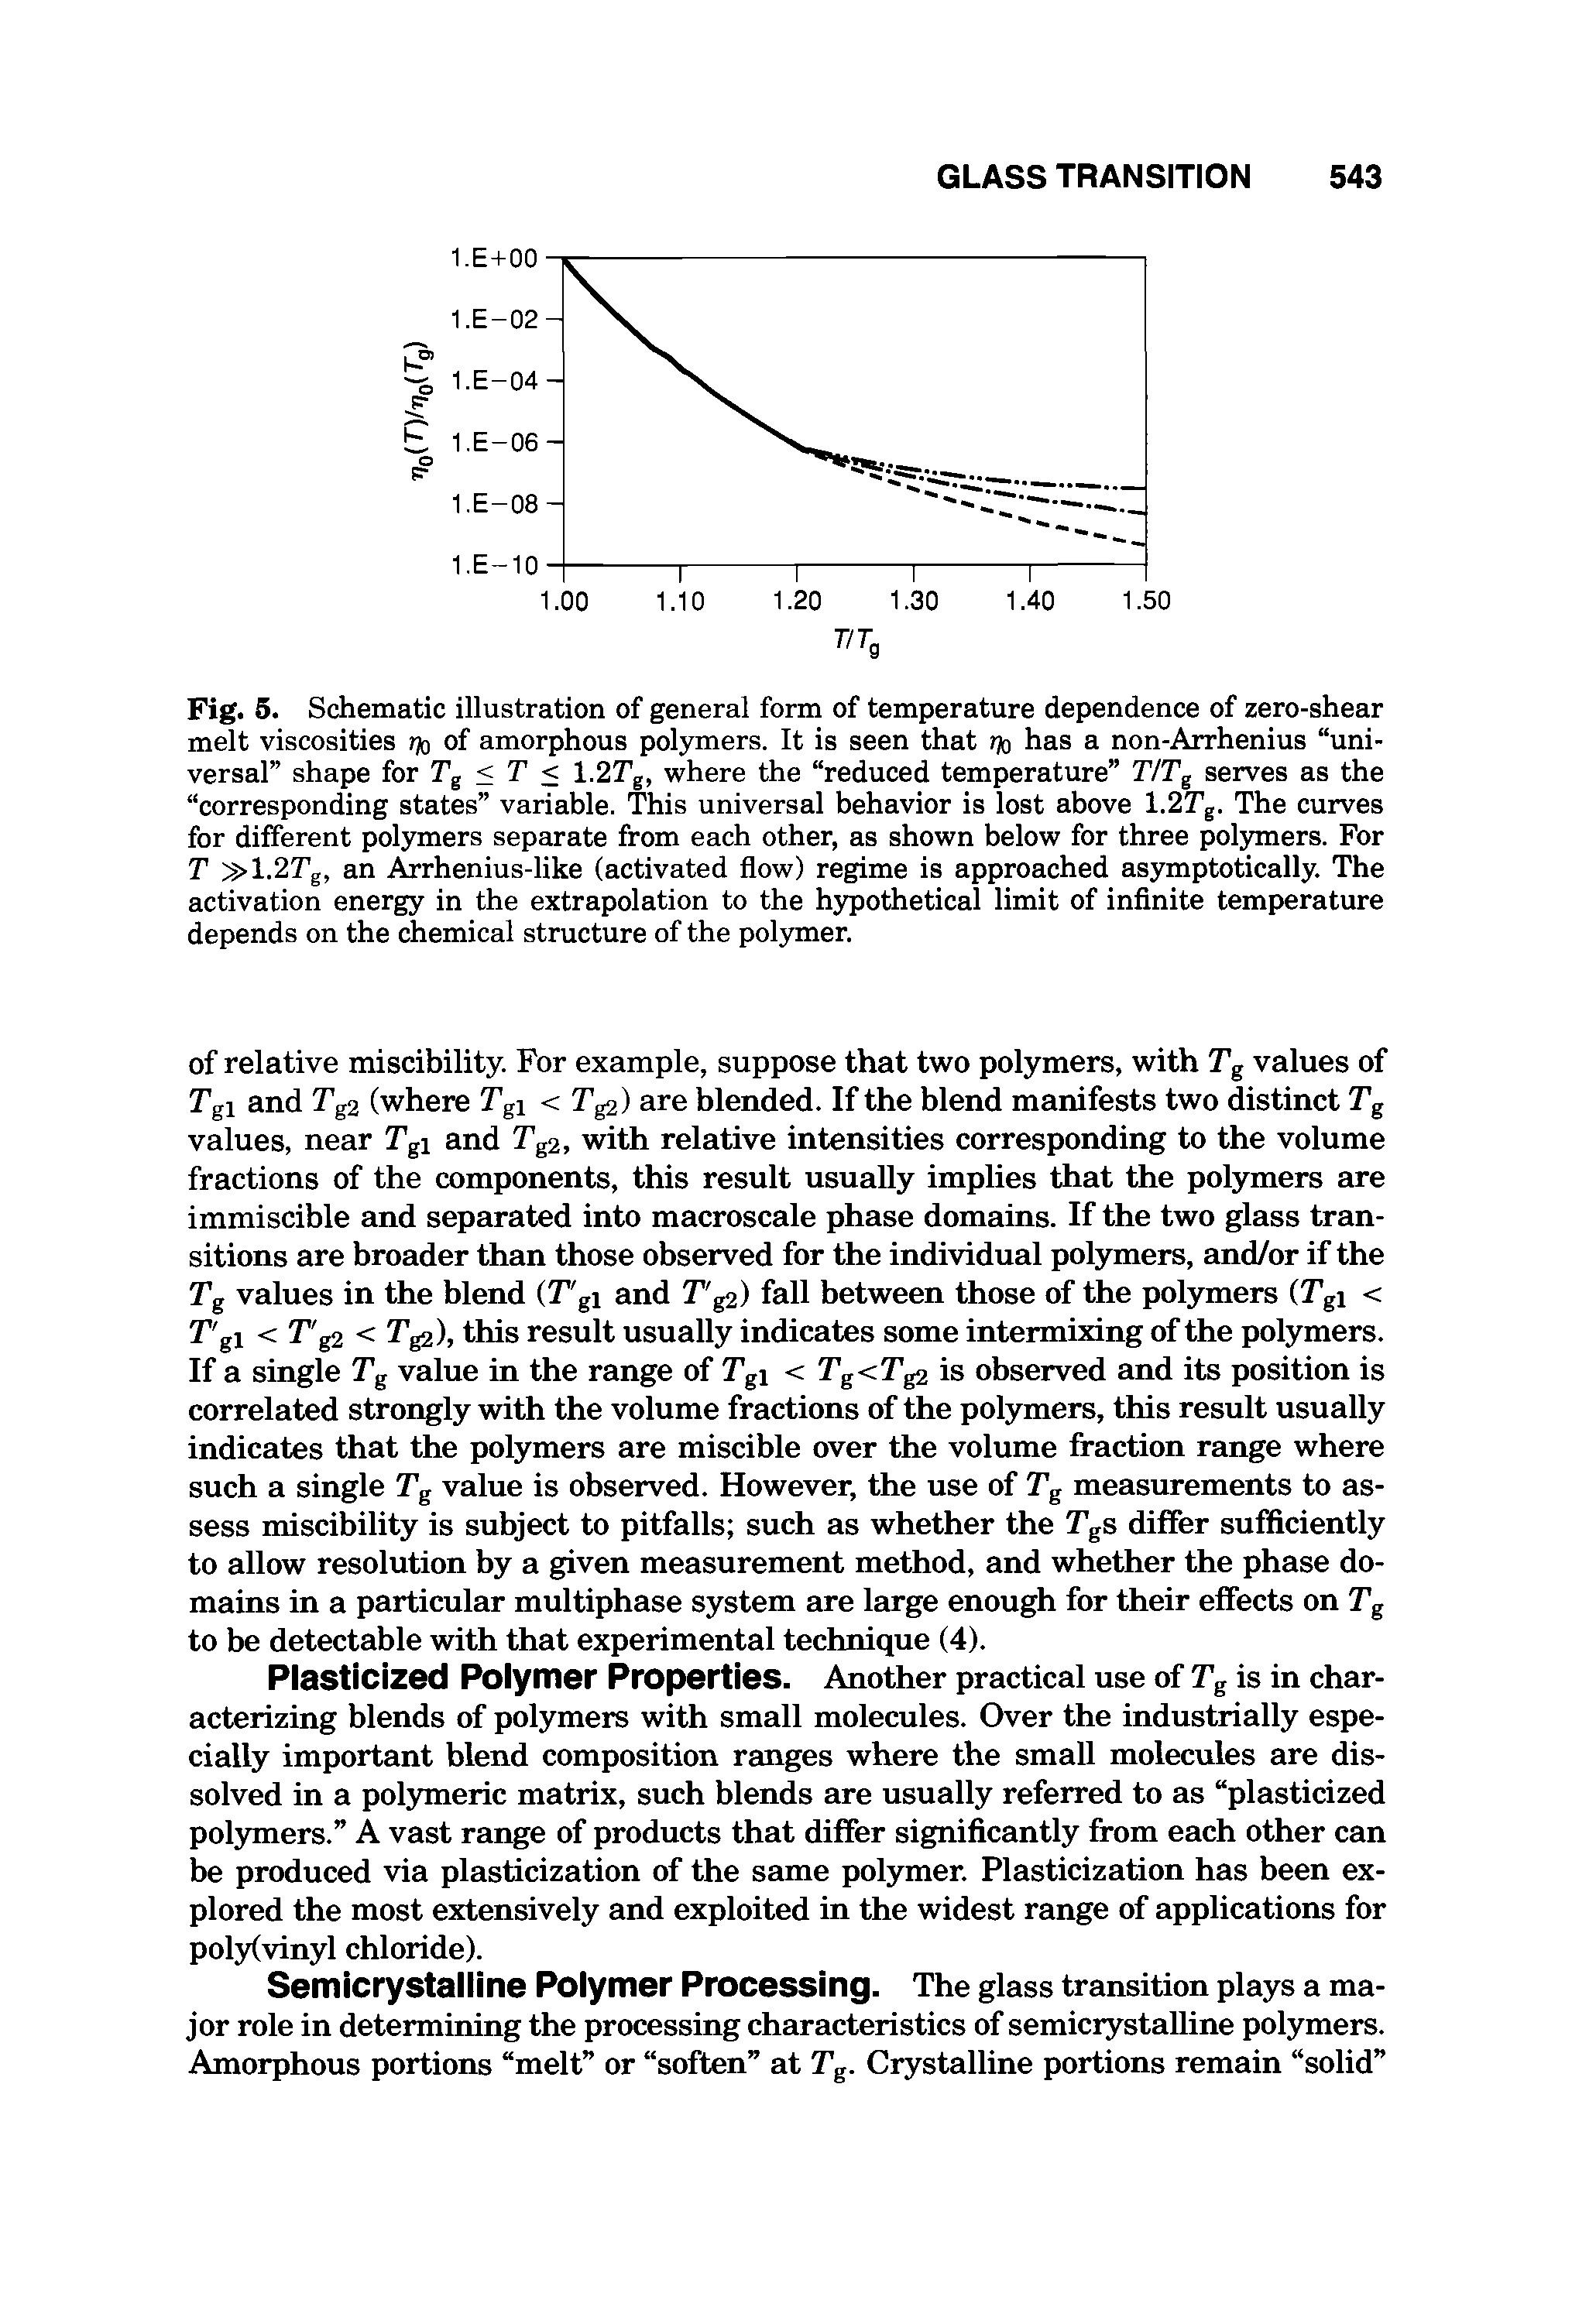 Fig. 5. Schematic illustration of general form of temperature dependence of zero-shear melt viscosities % of amorphous polymers. It is seen that % has a non-Arrhenius universal shape for Tg S T < 1.2Tg, where the reduced temperature TITg serves as the corresponding states variable. This universal behavior is lost above 1.27 g. The curves for different polymers separate from each other, as shown below for three polymers. For T 1.2T g, an Arrhenius-like (activated flow) regime is approached asymptotically. The activation energy in the extrapolation to the hypothetical limit of inflnite temperature depends on the chemical structure of the polymer.